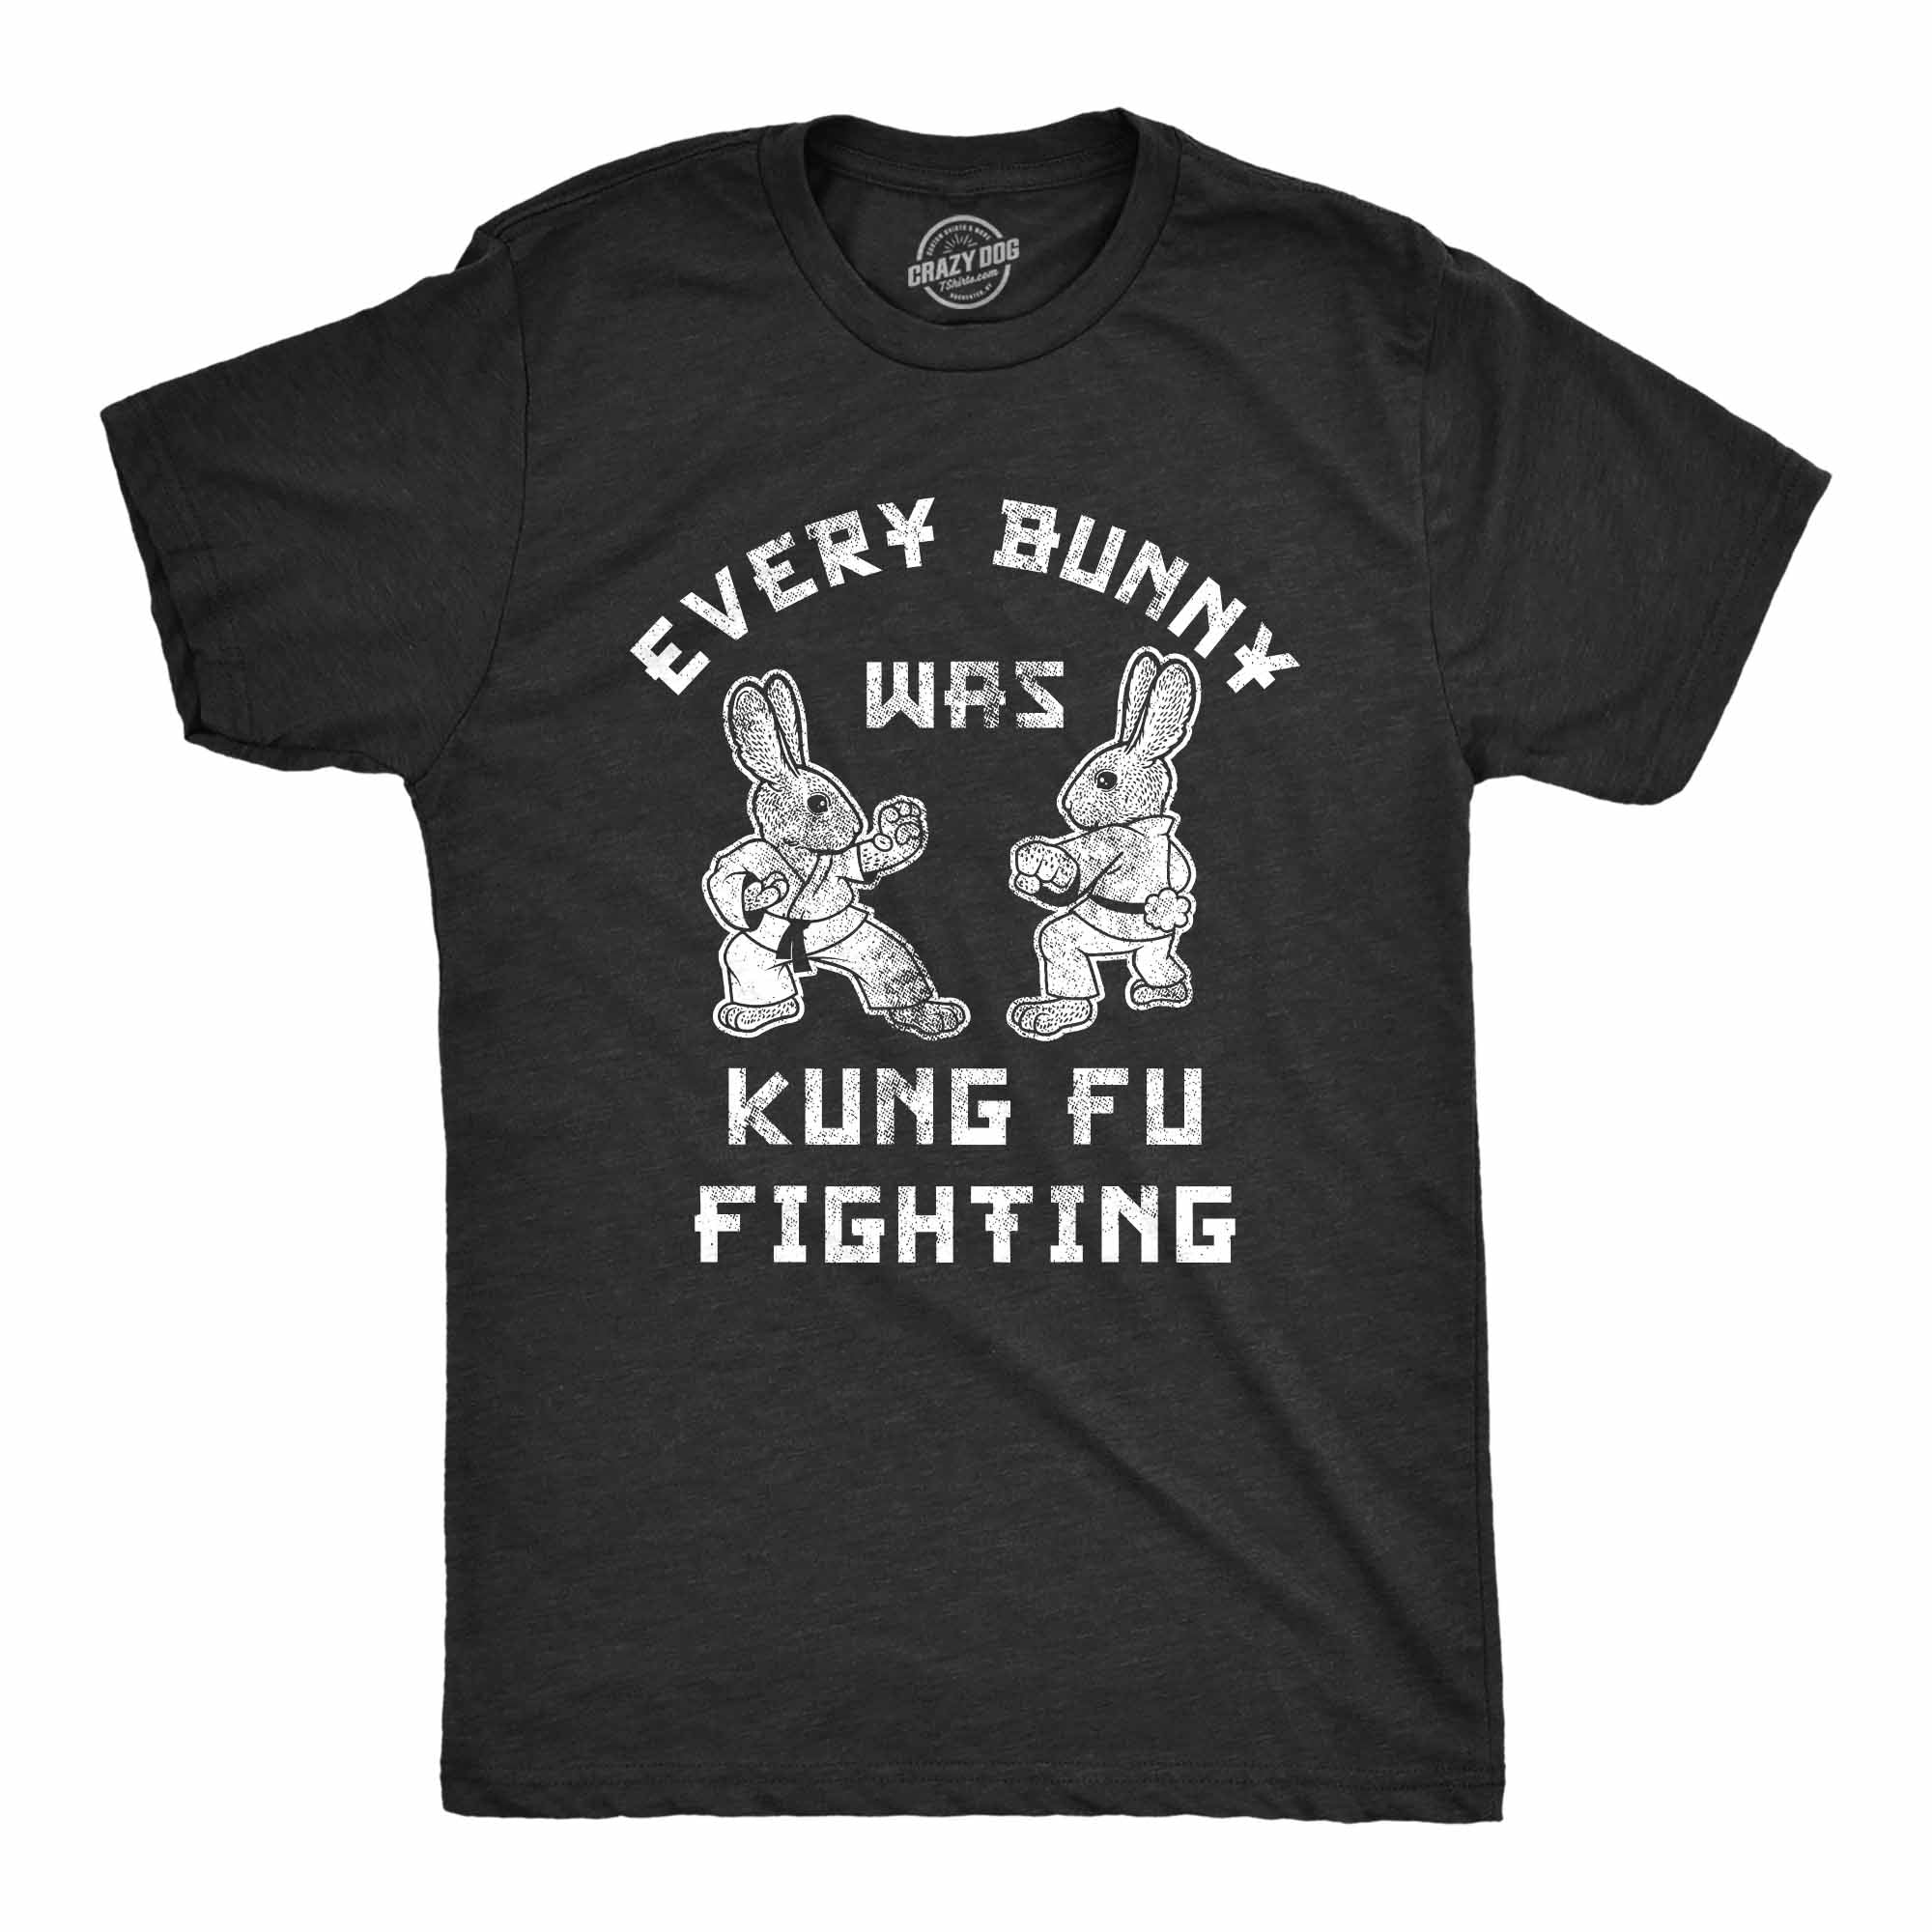 Funny Heather Black Every Bunny Was Kung Fu Fighting Mens T Shirt Nerdy Easter Animal Sarcastic Tee